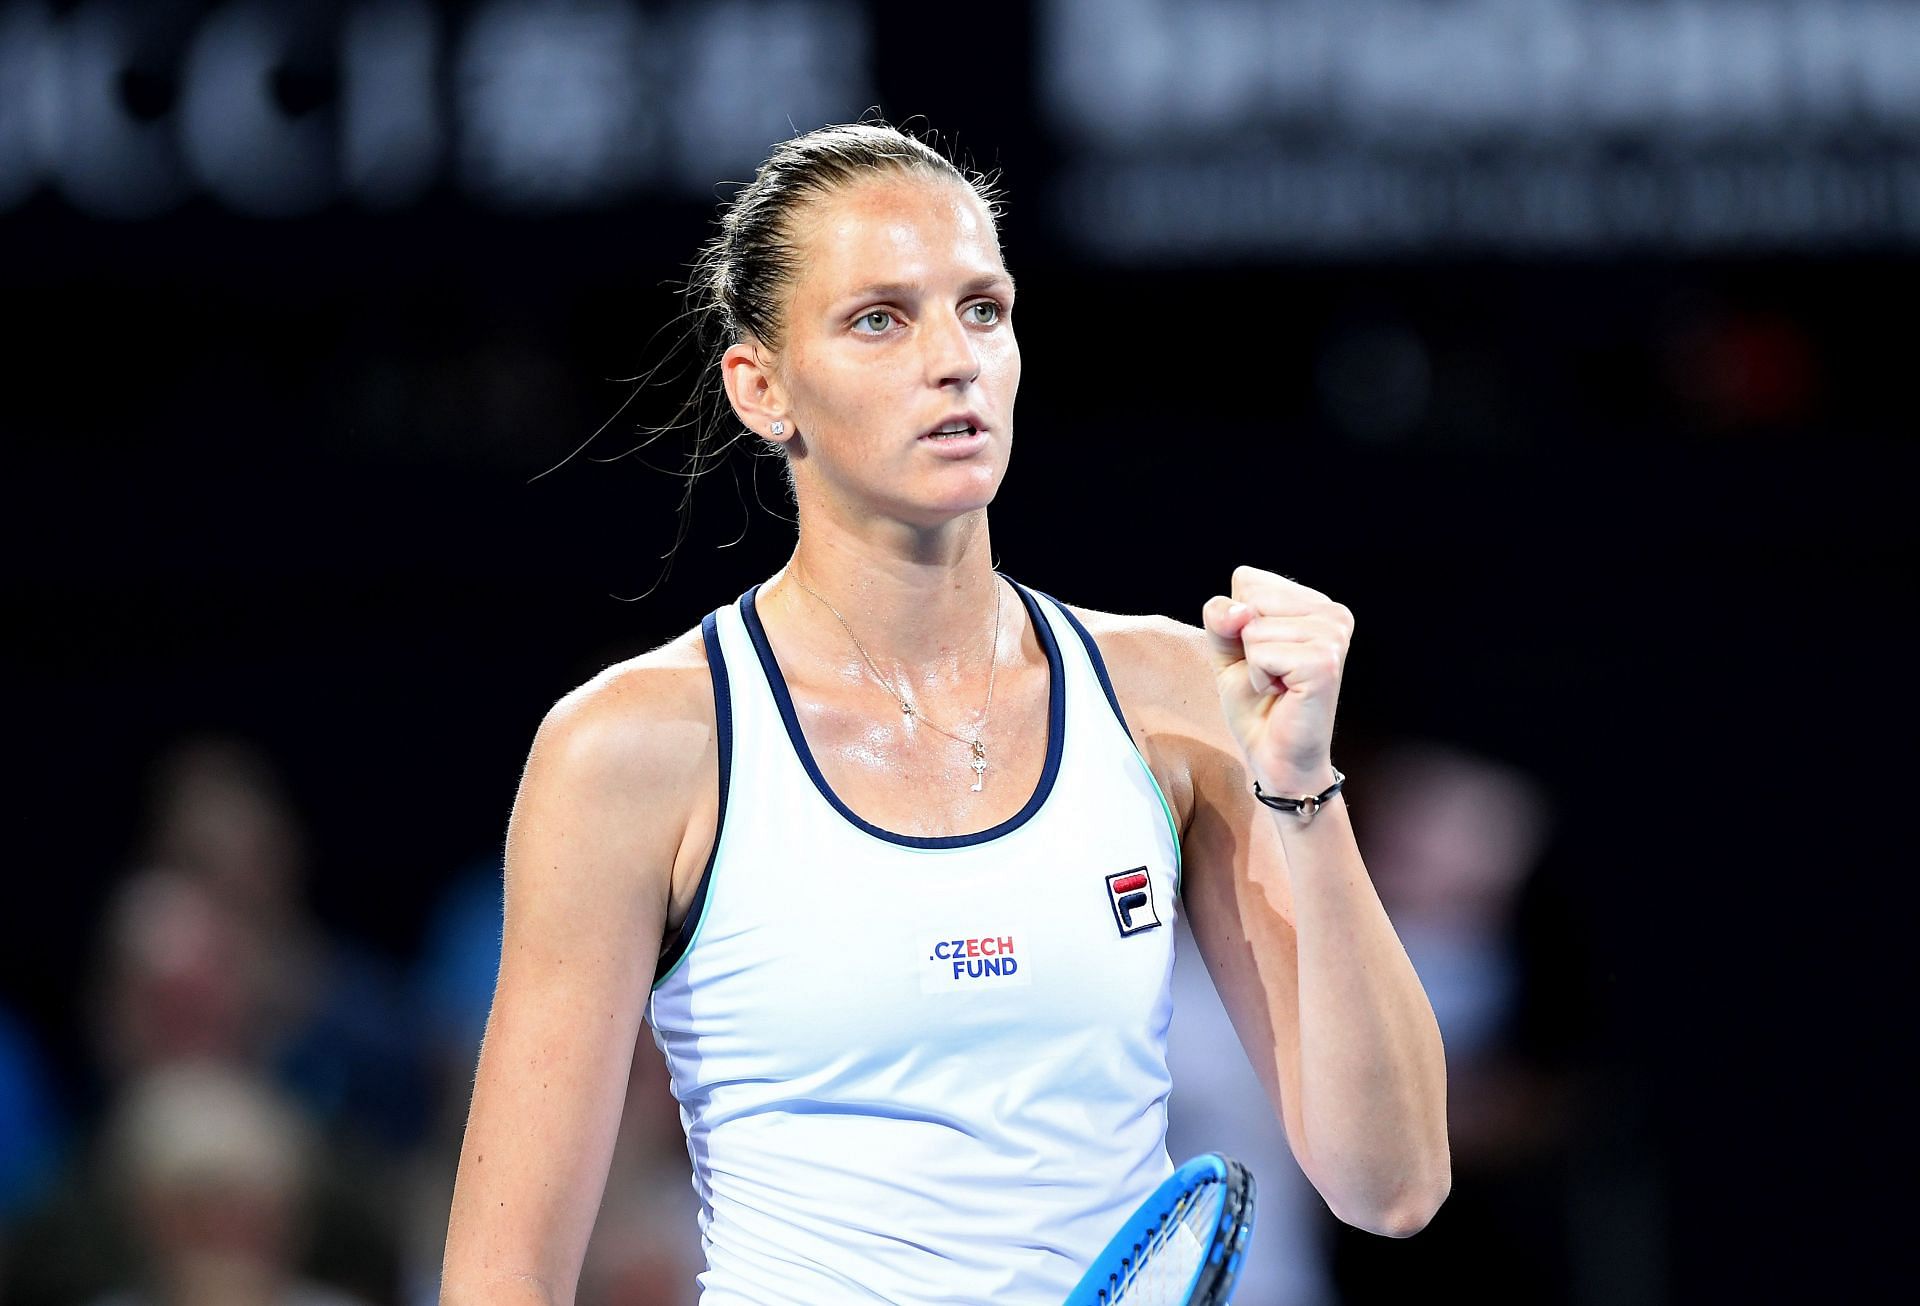 Pliskova will be a favorite to win the contest on paper